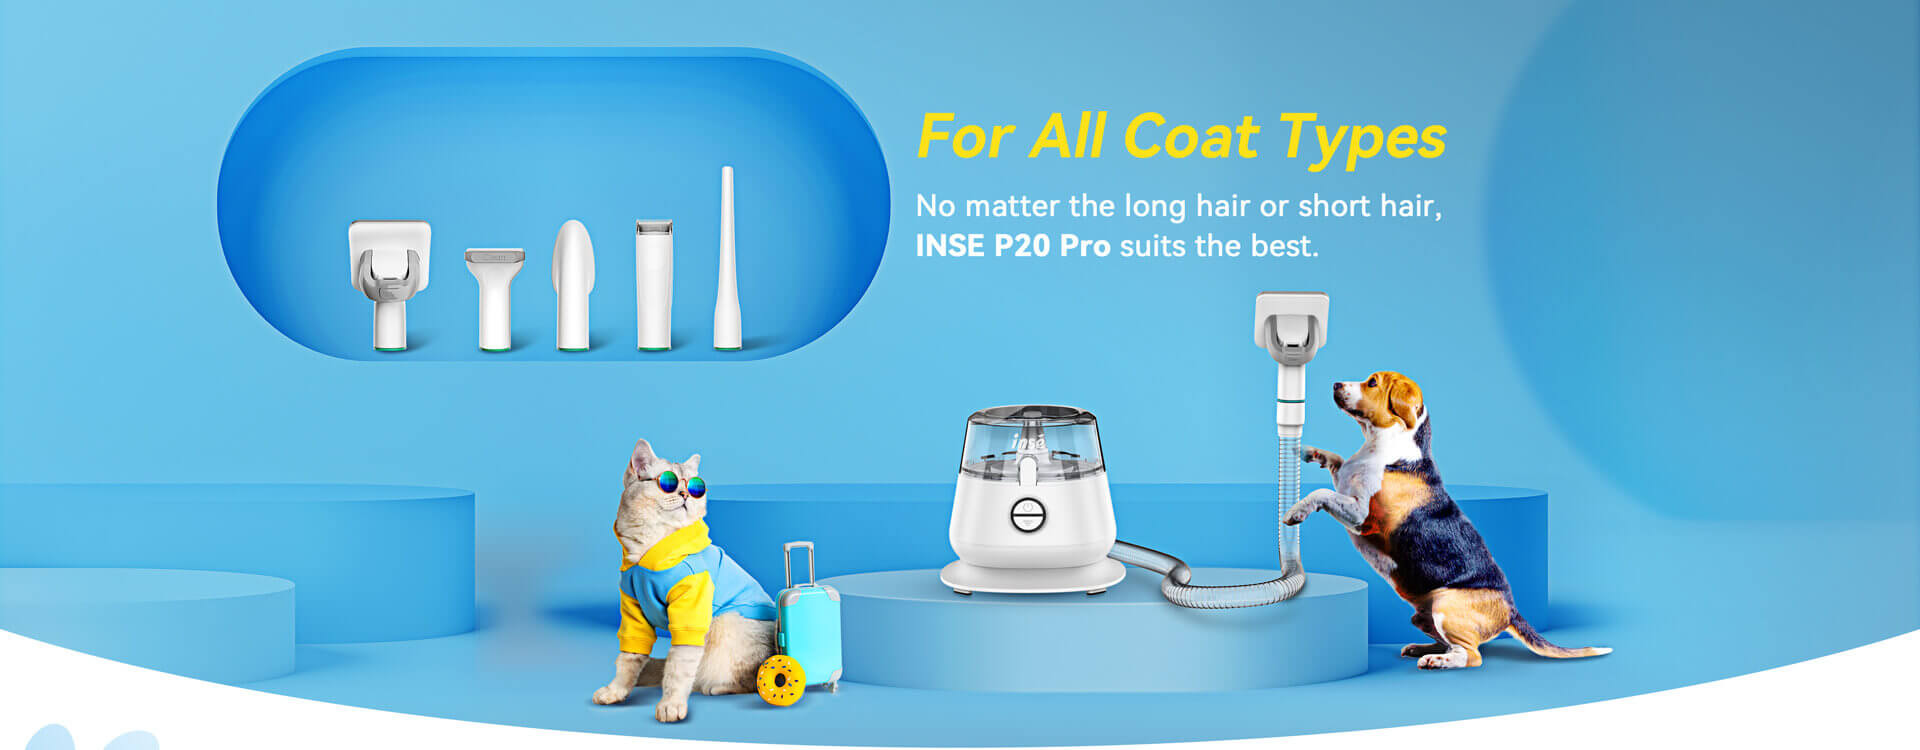 inse p20 pro dog grooming kit for all coat types-inselife.com